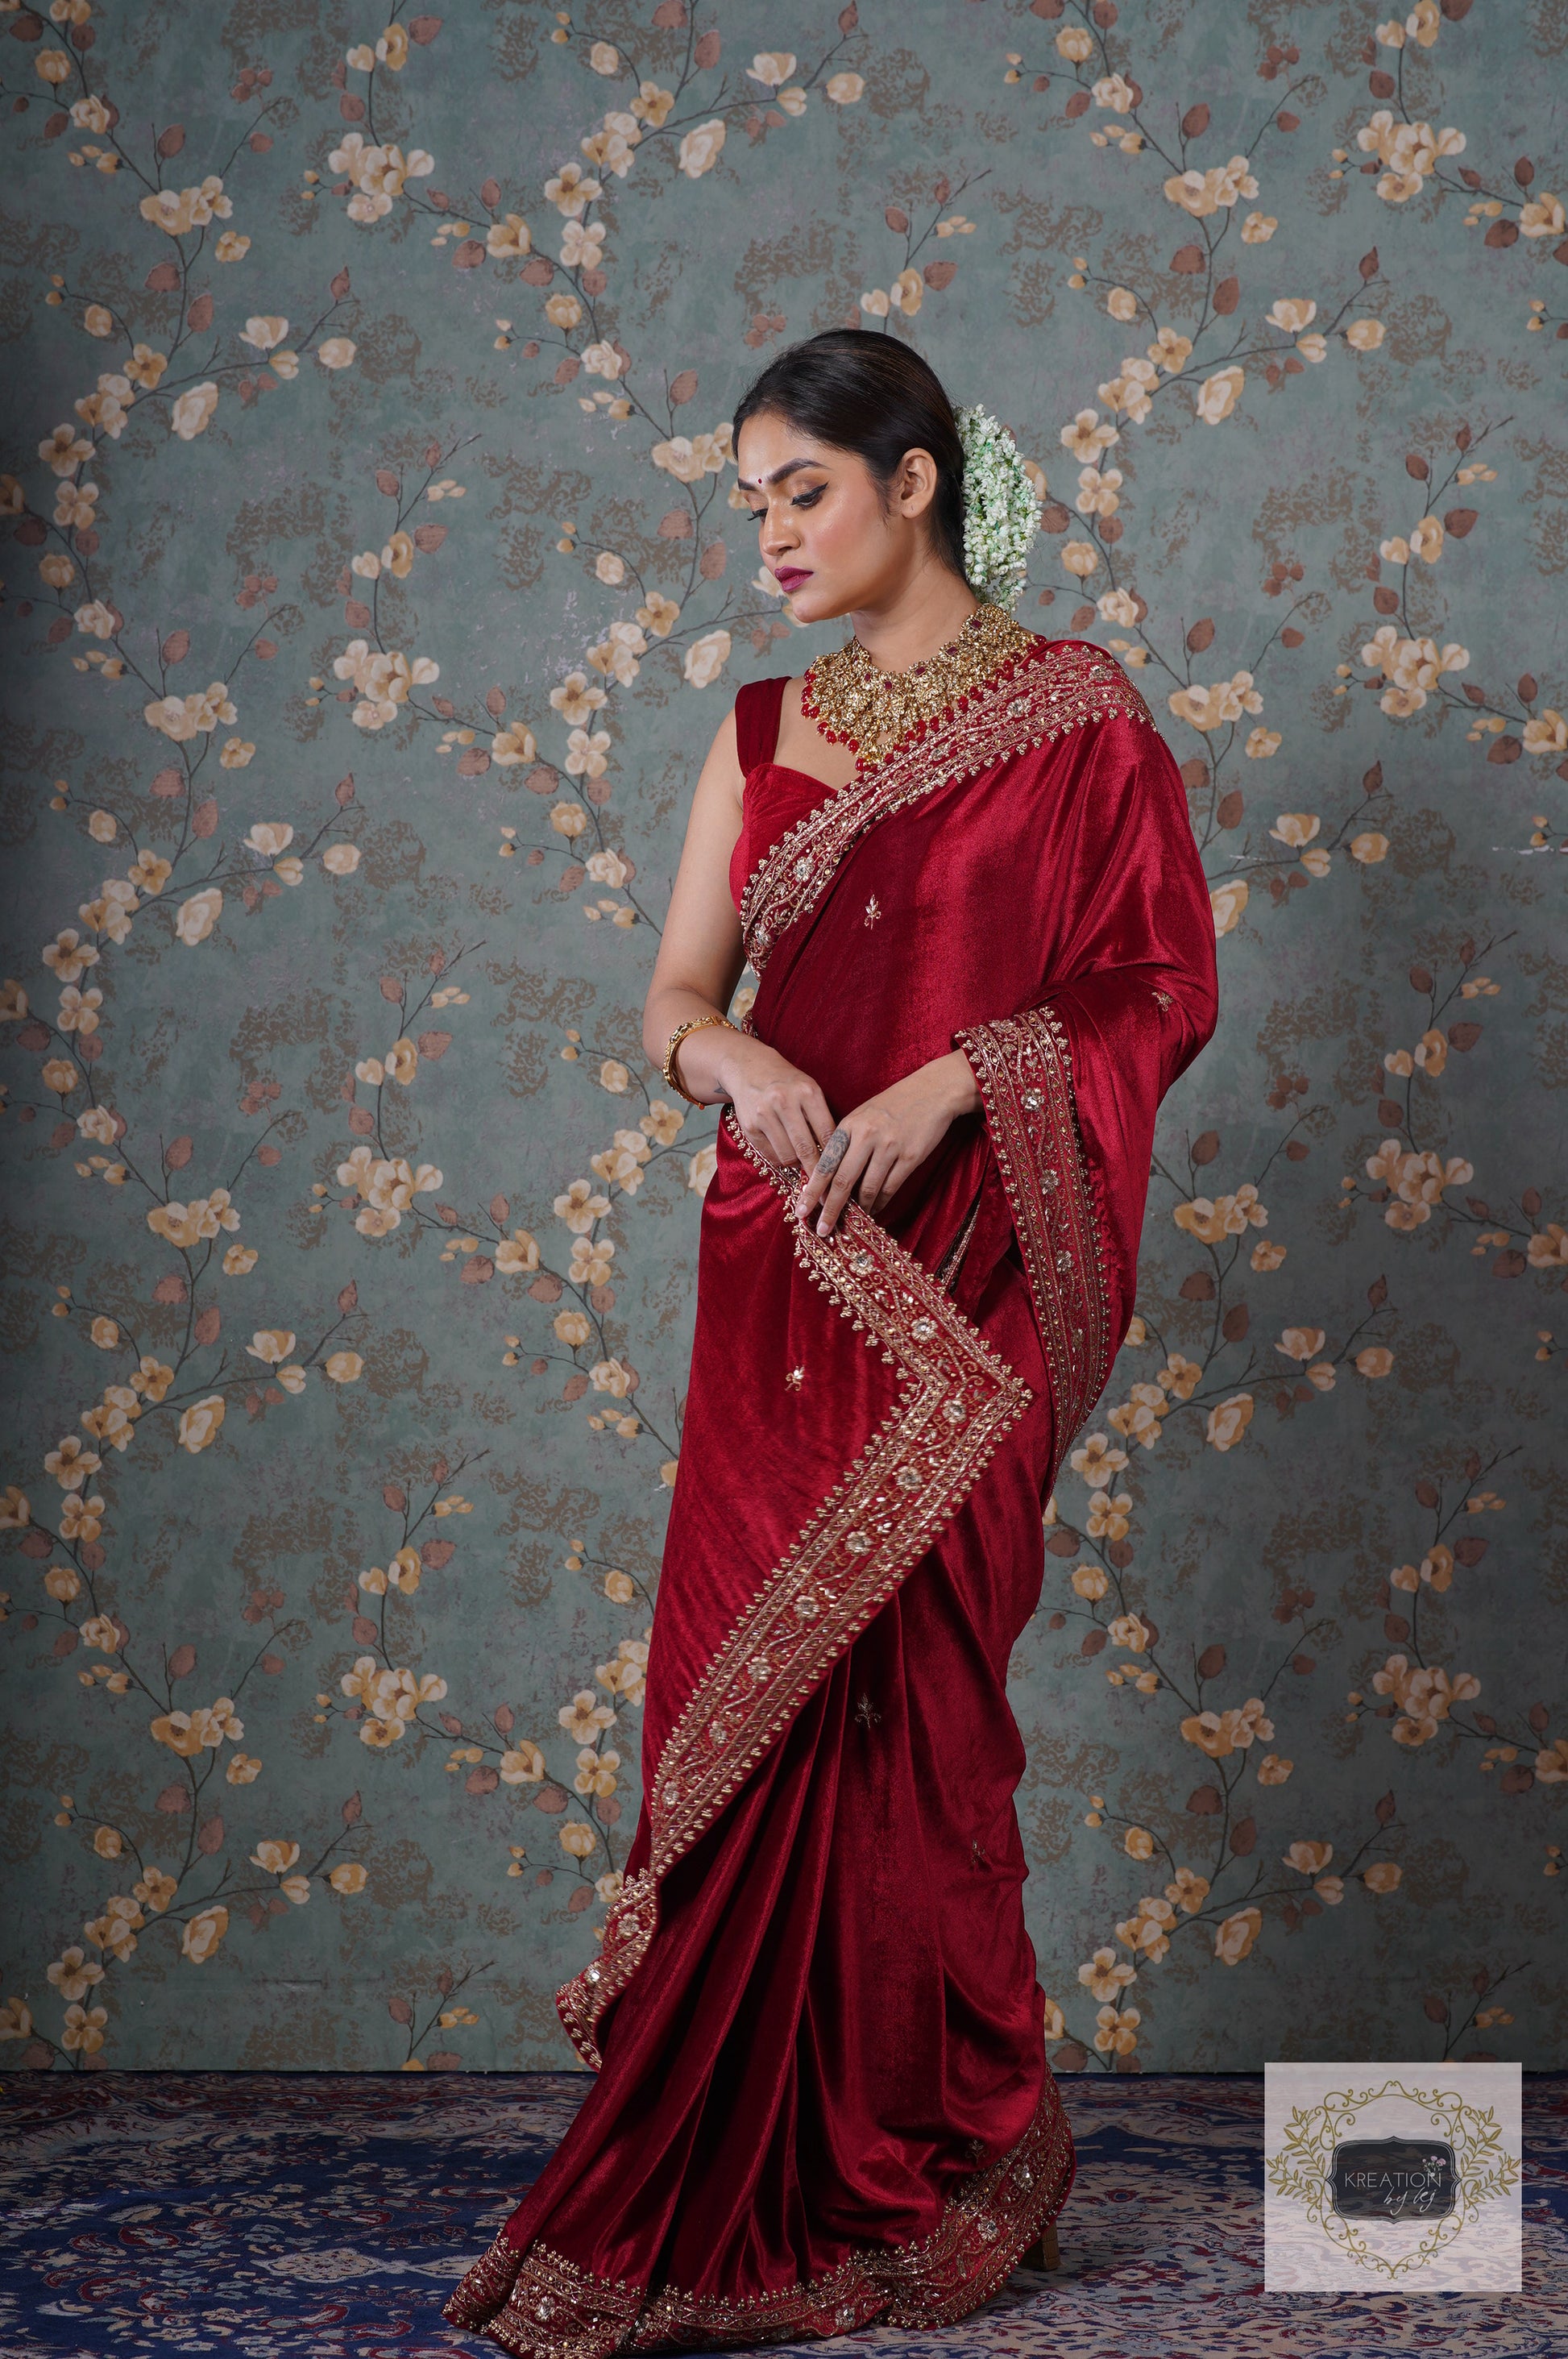 Jacquard Bridal Saree in Red and Maroon with Stone work | Indian bridal  wear, Wedding saree indian, Party wear sarees